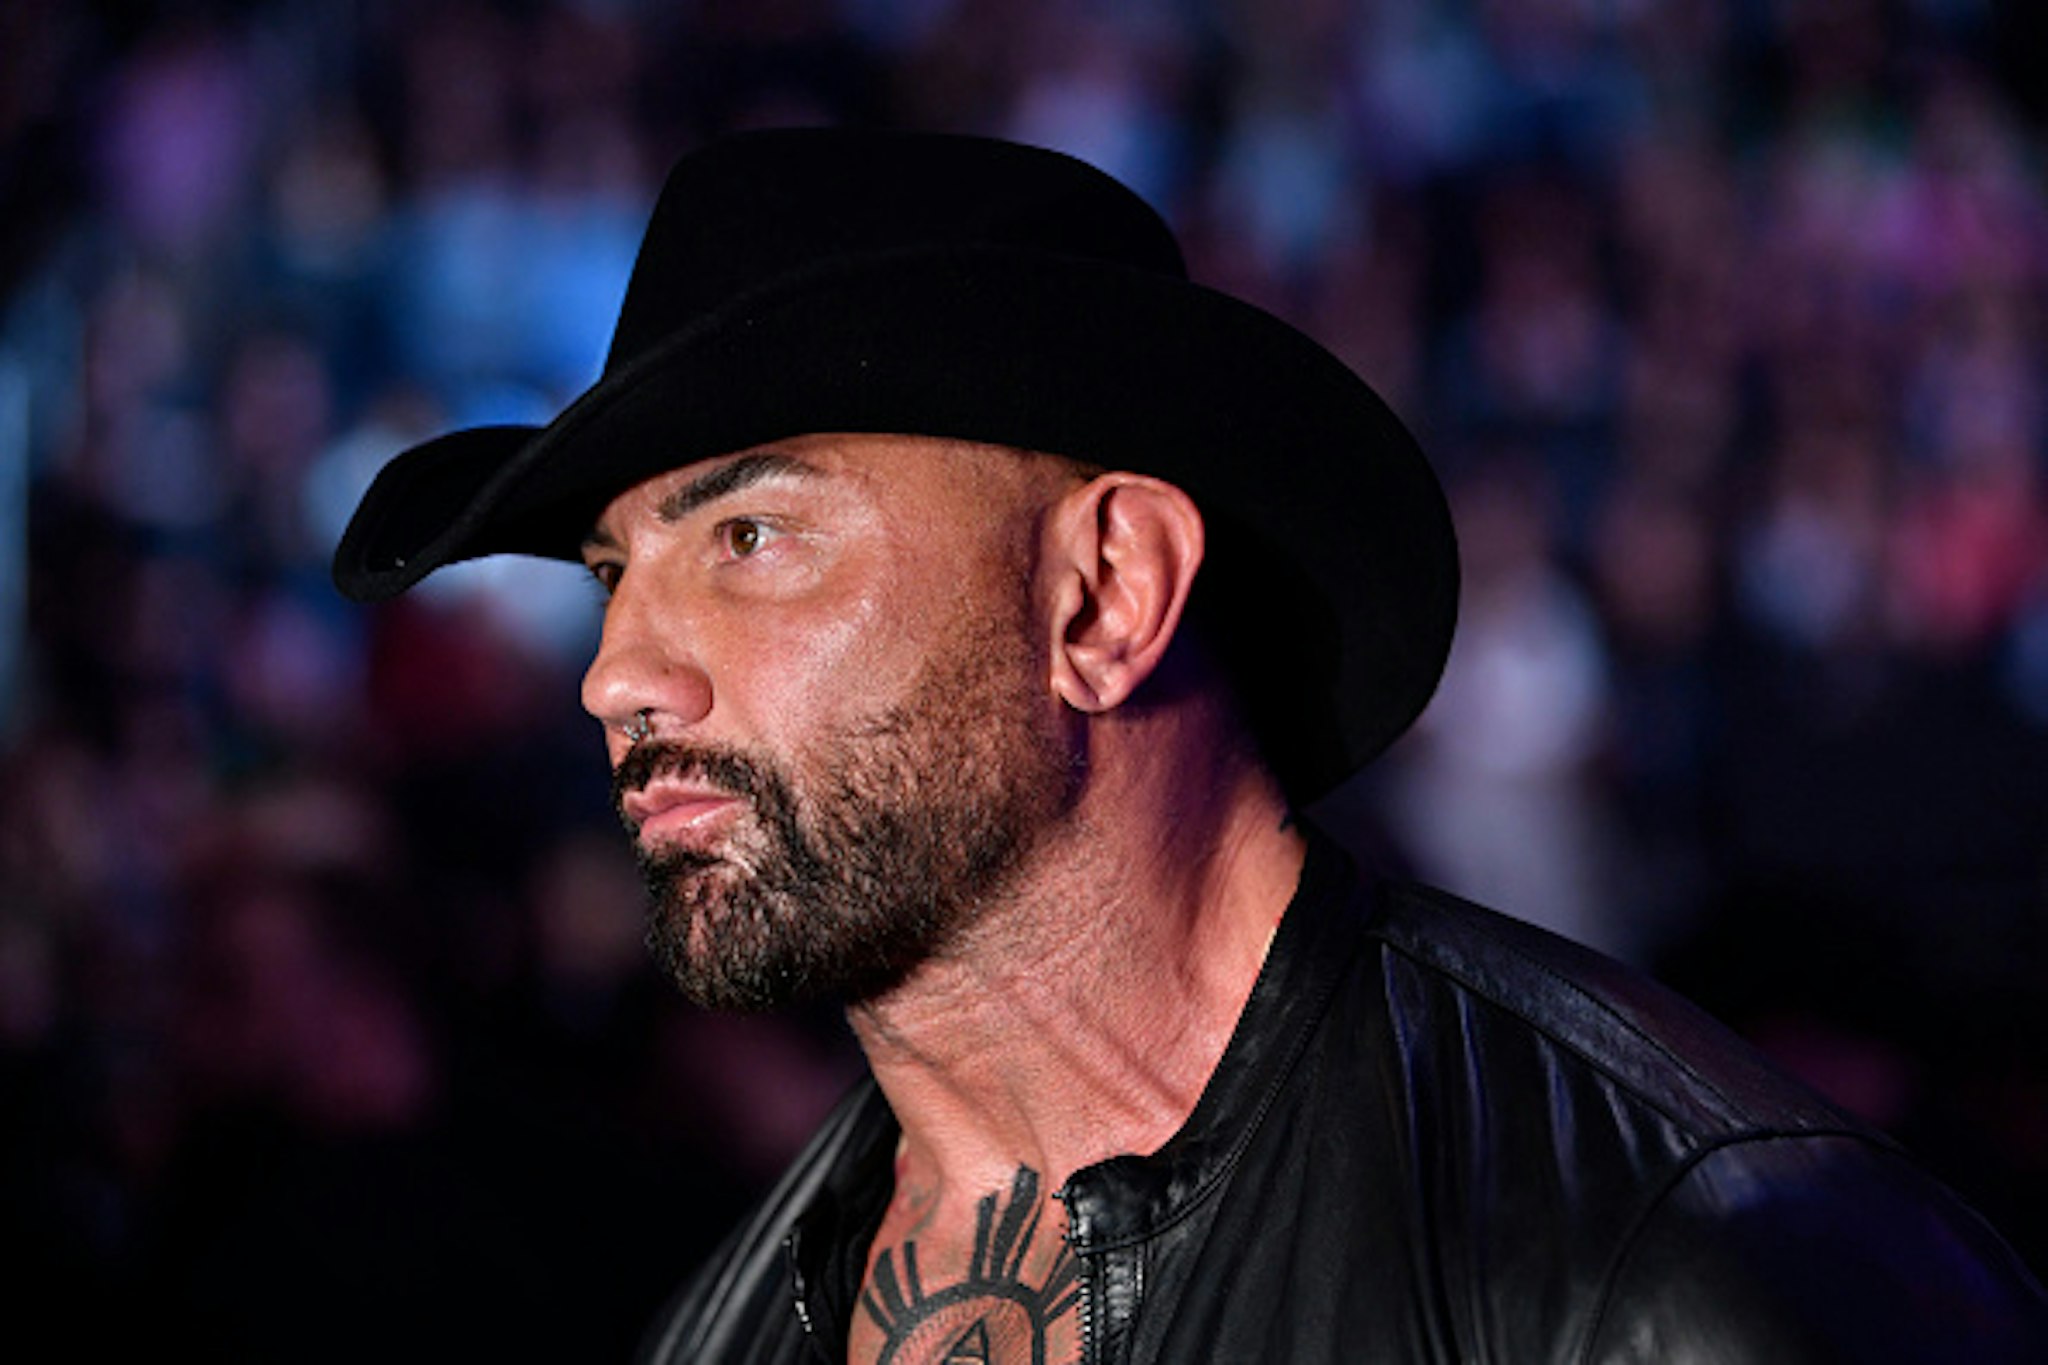 LAS VEGAS, NEVADA - JANUARY 18: Dave Bautista attends the UFC 246 event at T-Mobile Arena on January 18, 2020 in Las Vegas, Nevada.